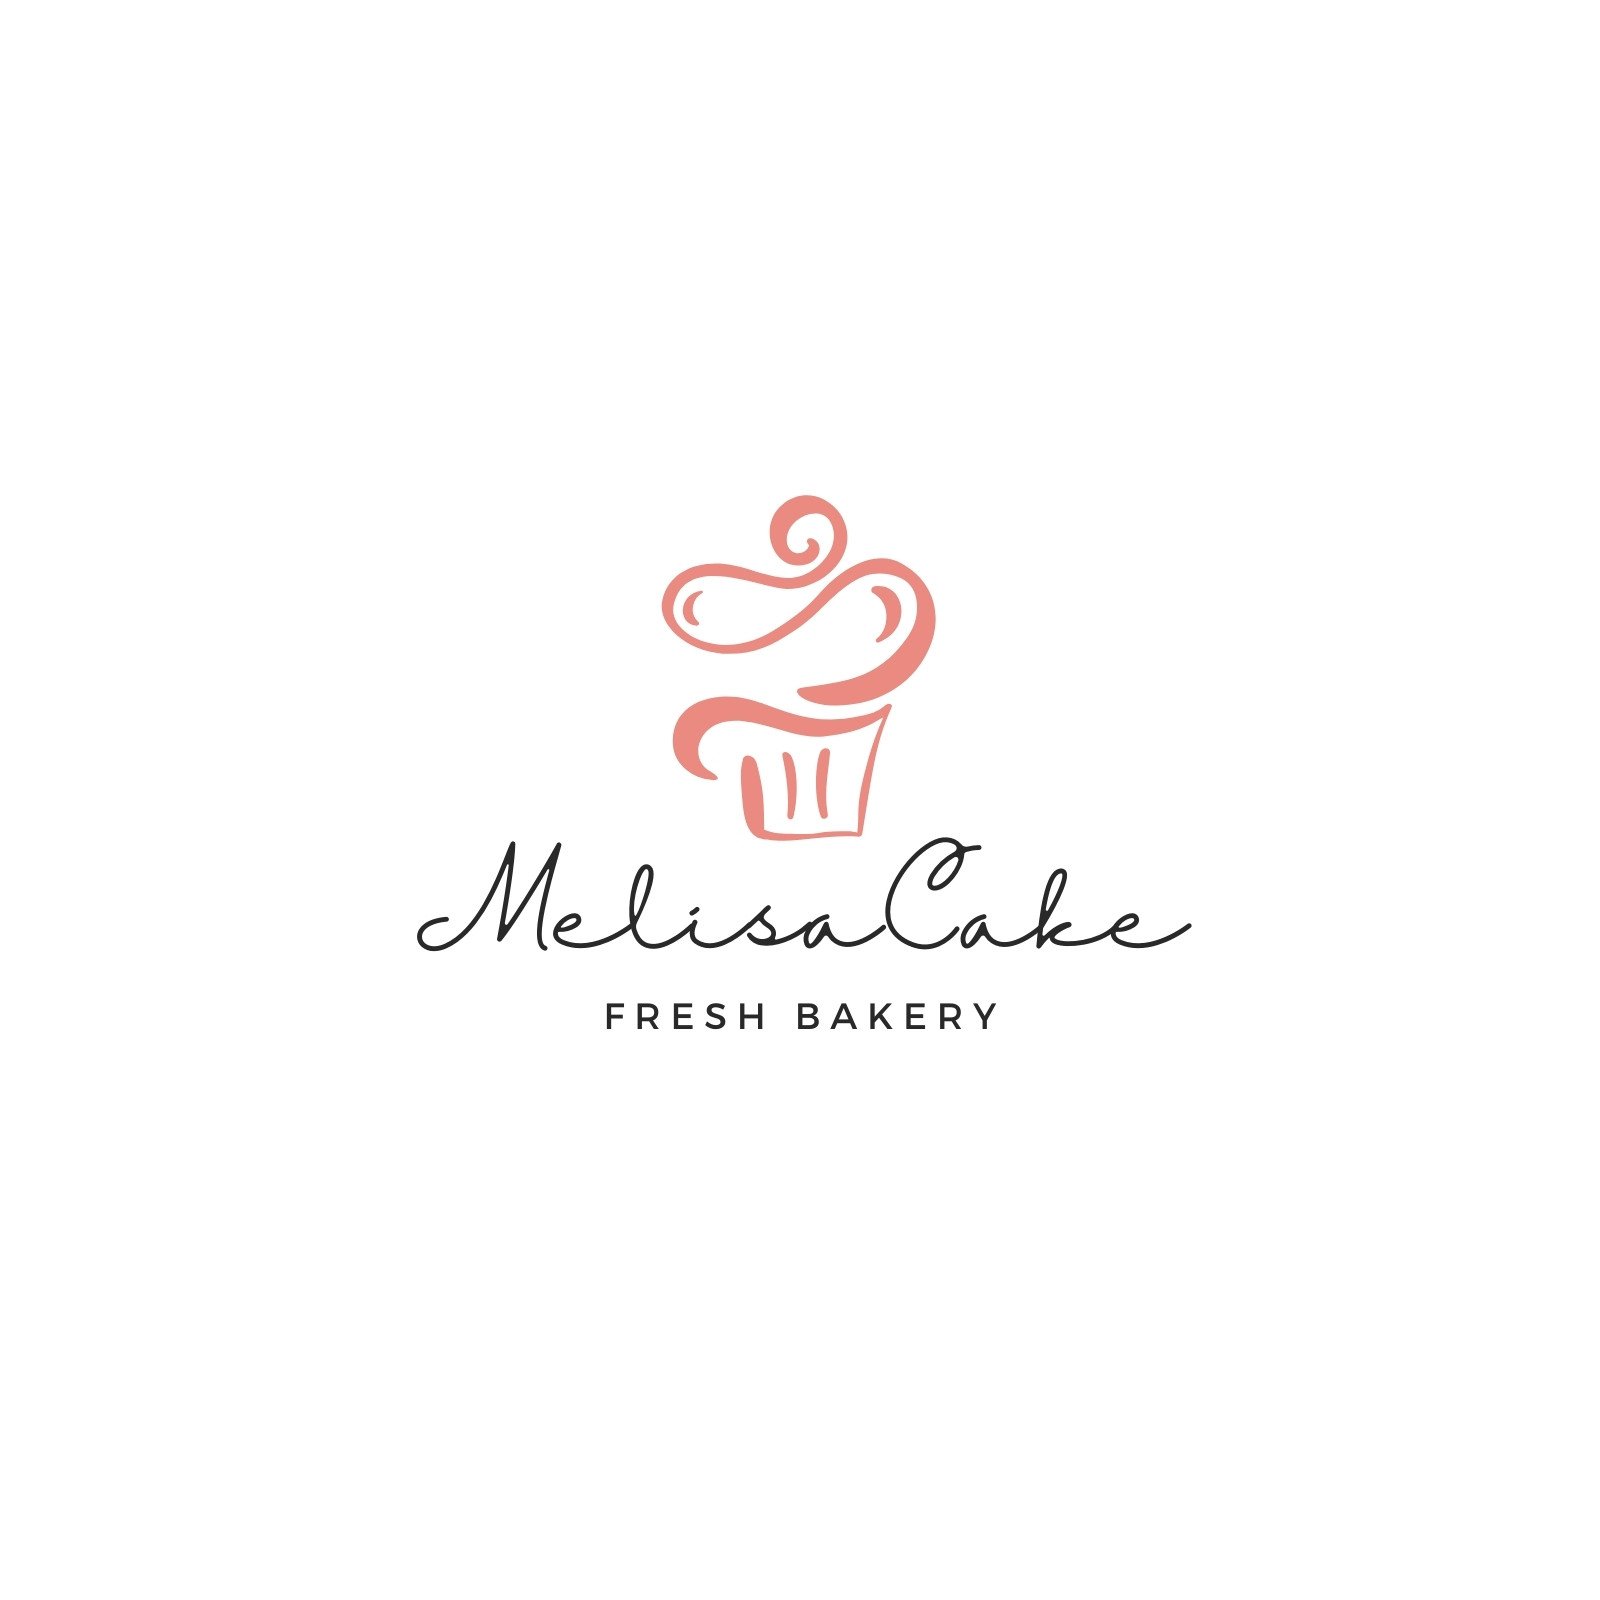 White And Green Illustration Cake Shop Logo Template and Ideas for Design |  Fotor